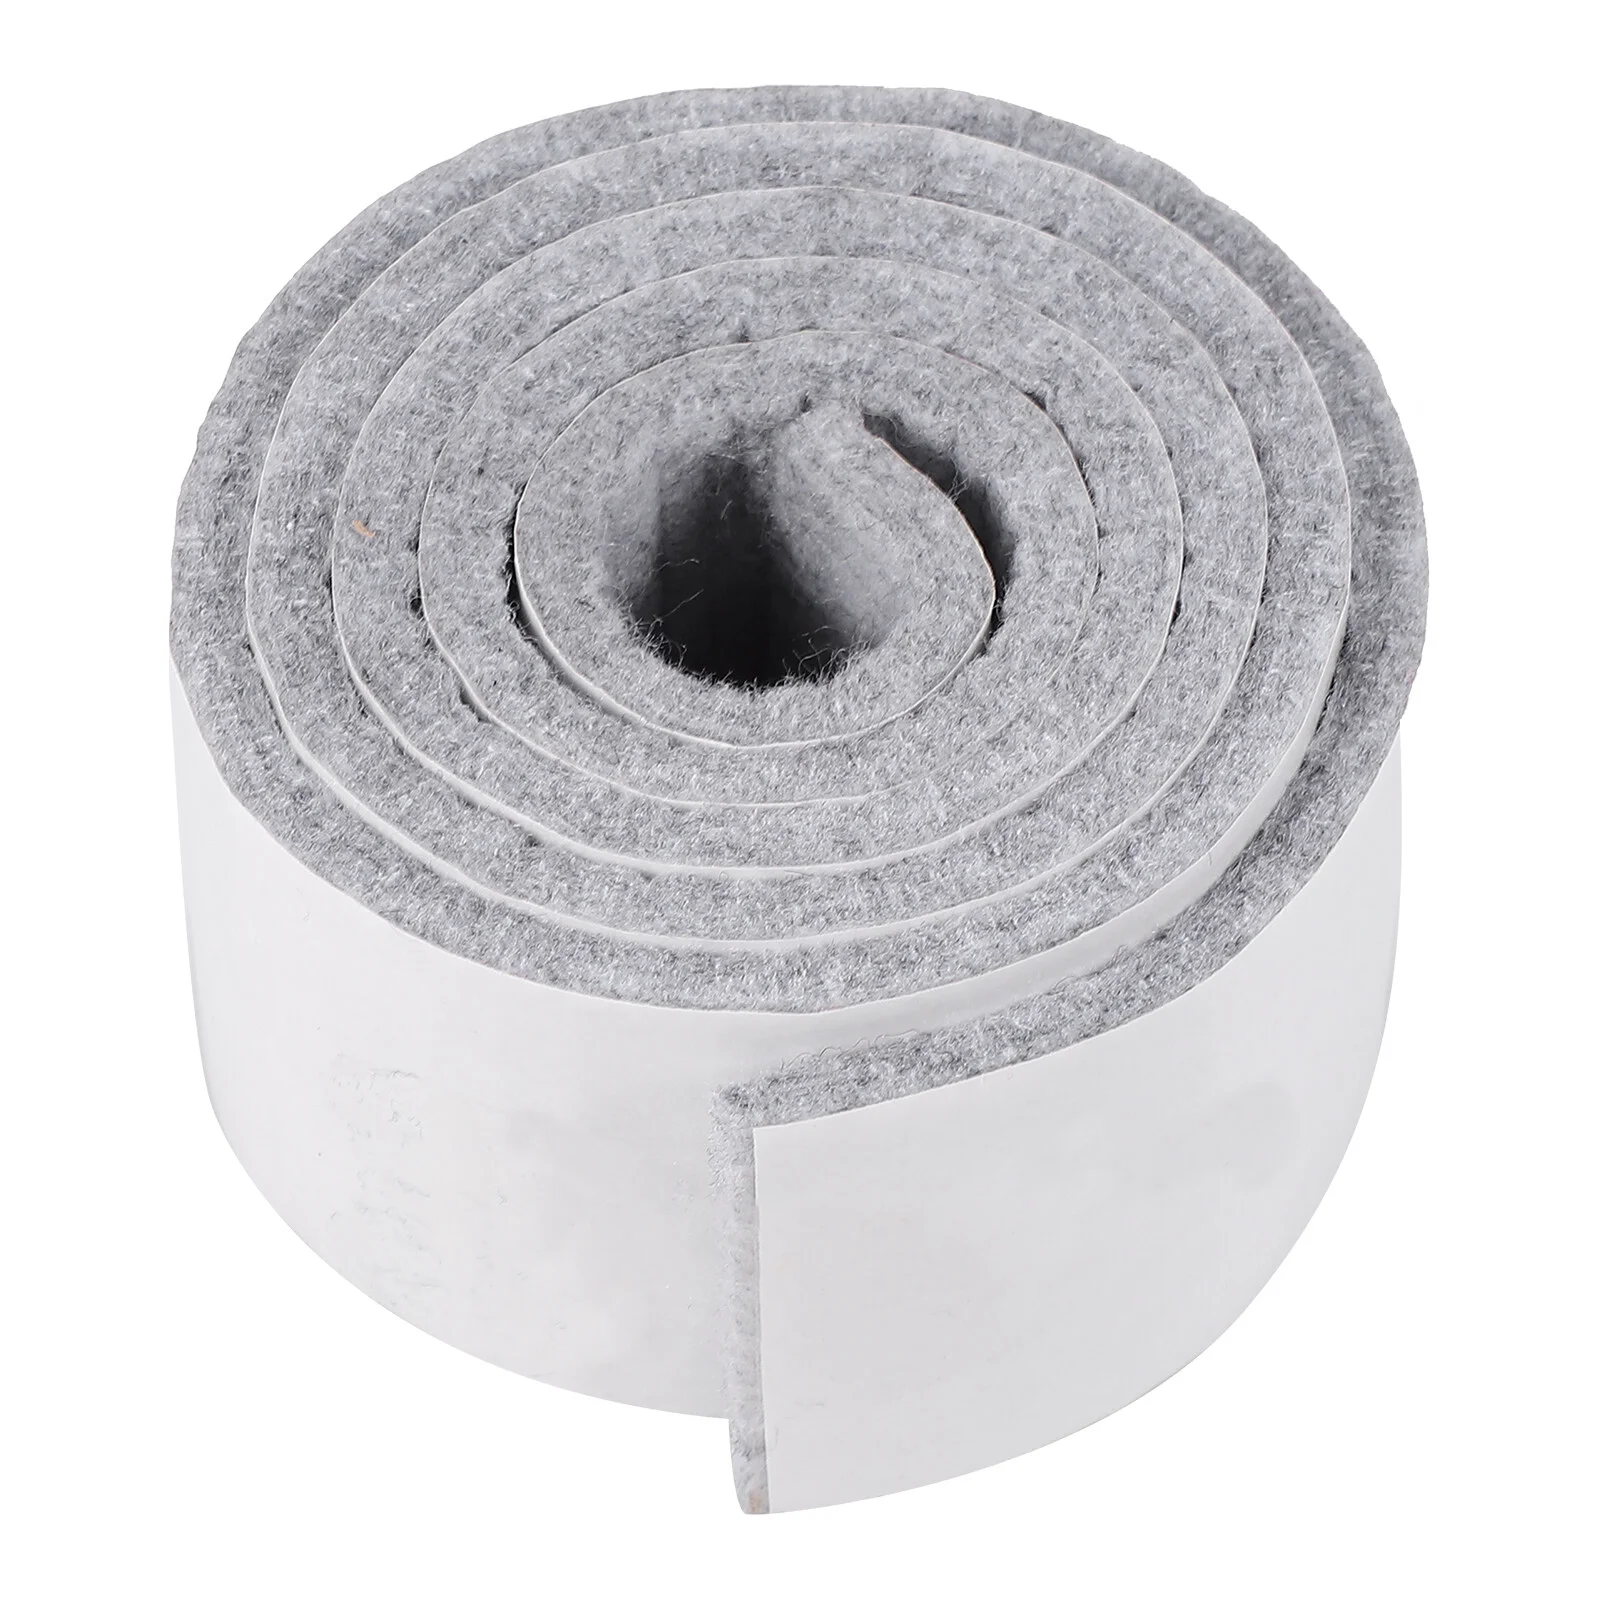 

Non-slip Felt Pad Table Legs Protector Adhesive Tape Heavy Duty Tables Chairs DIY Furniture Wool Fiber Pads